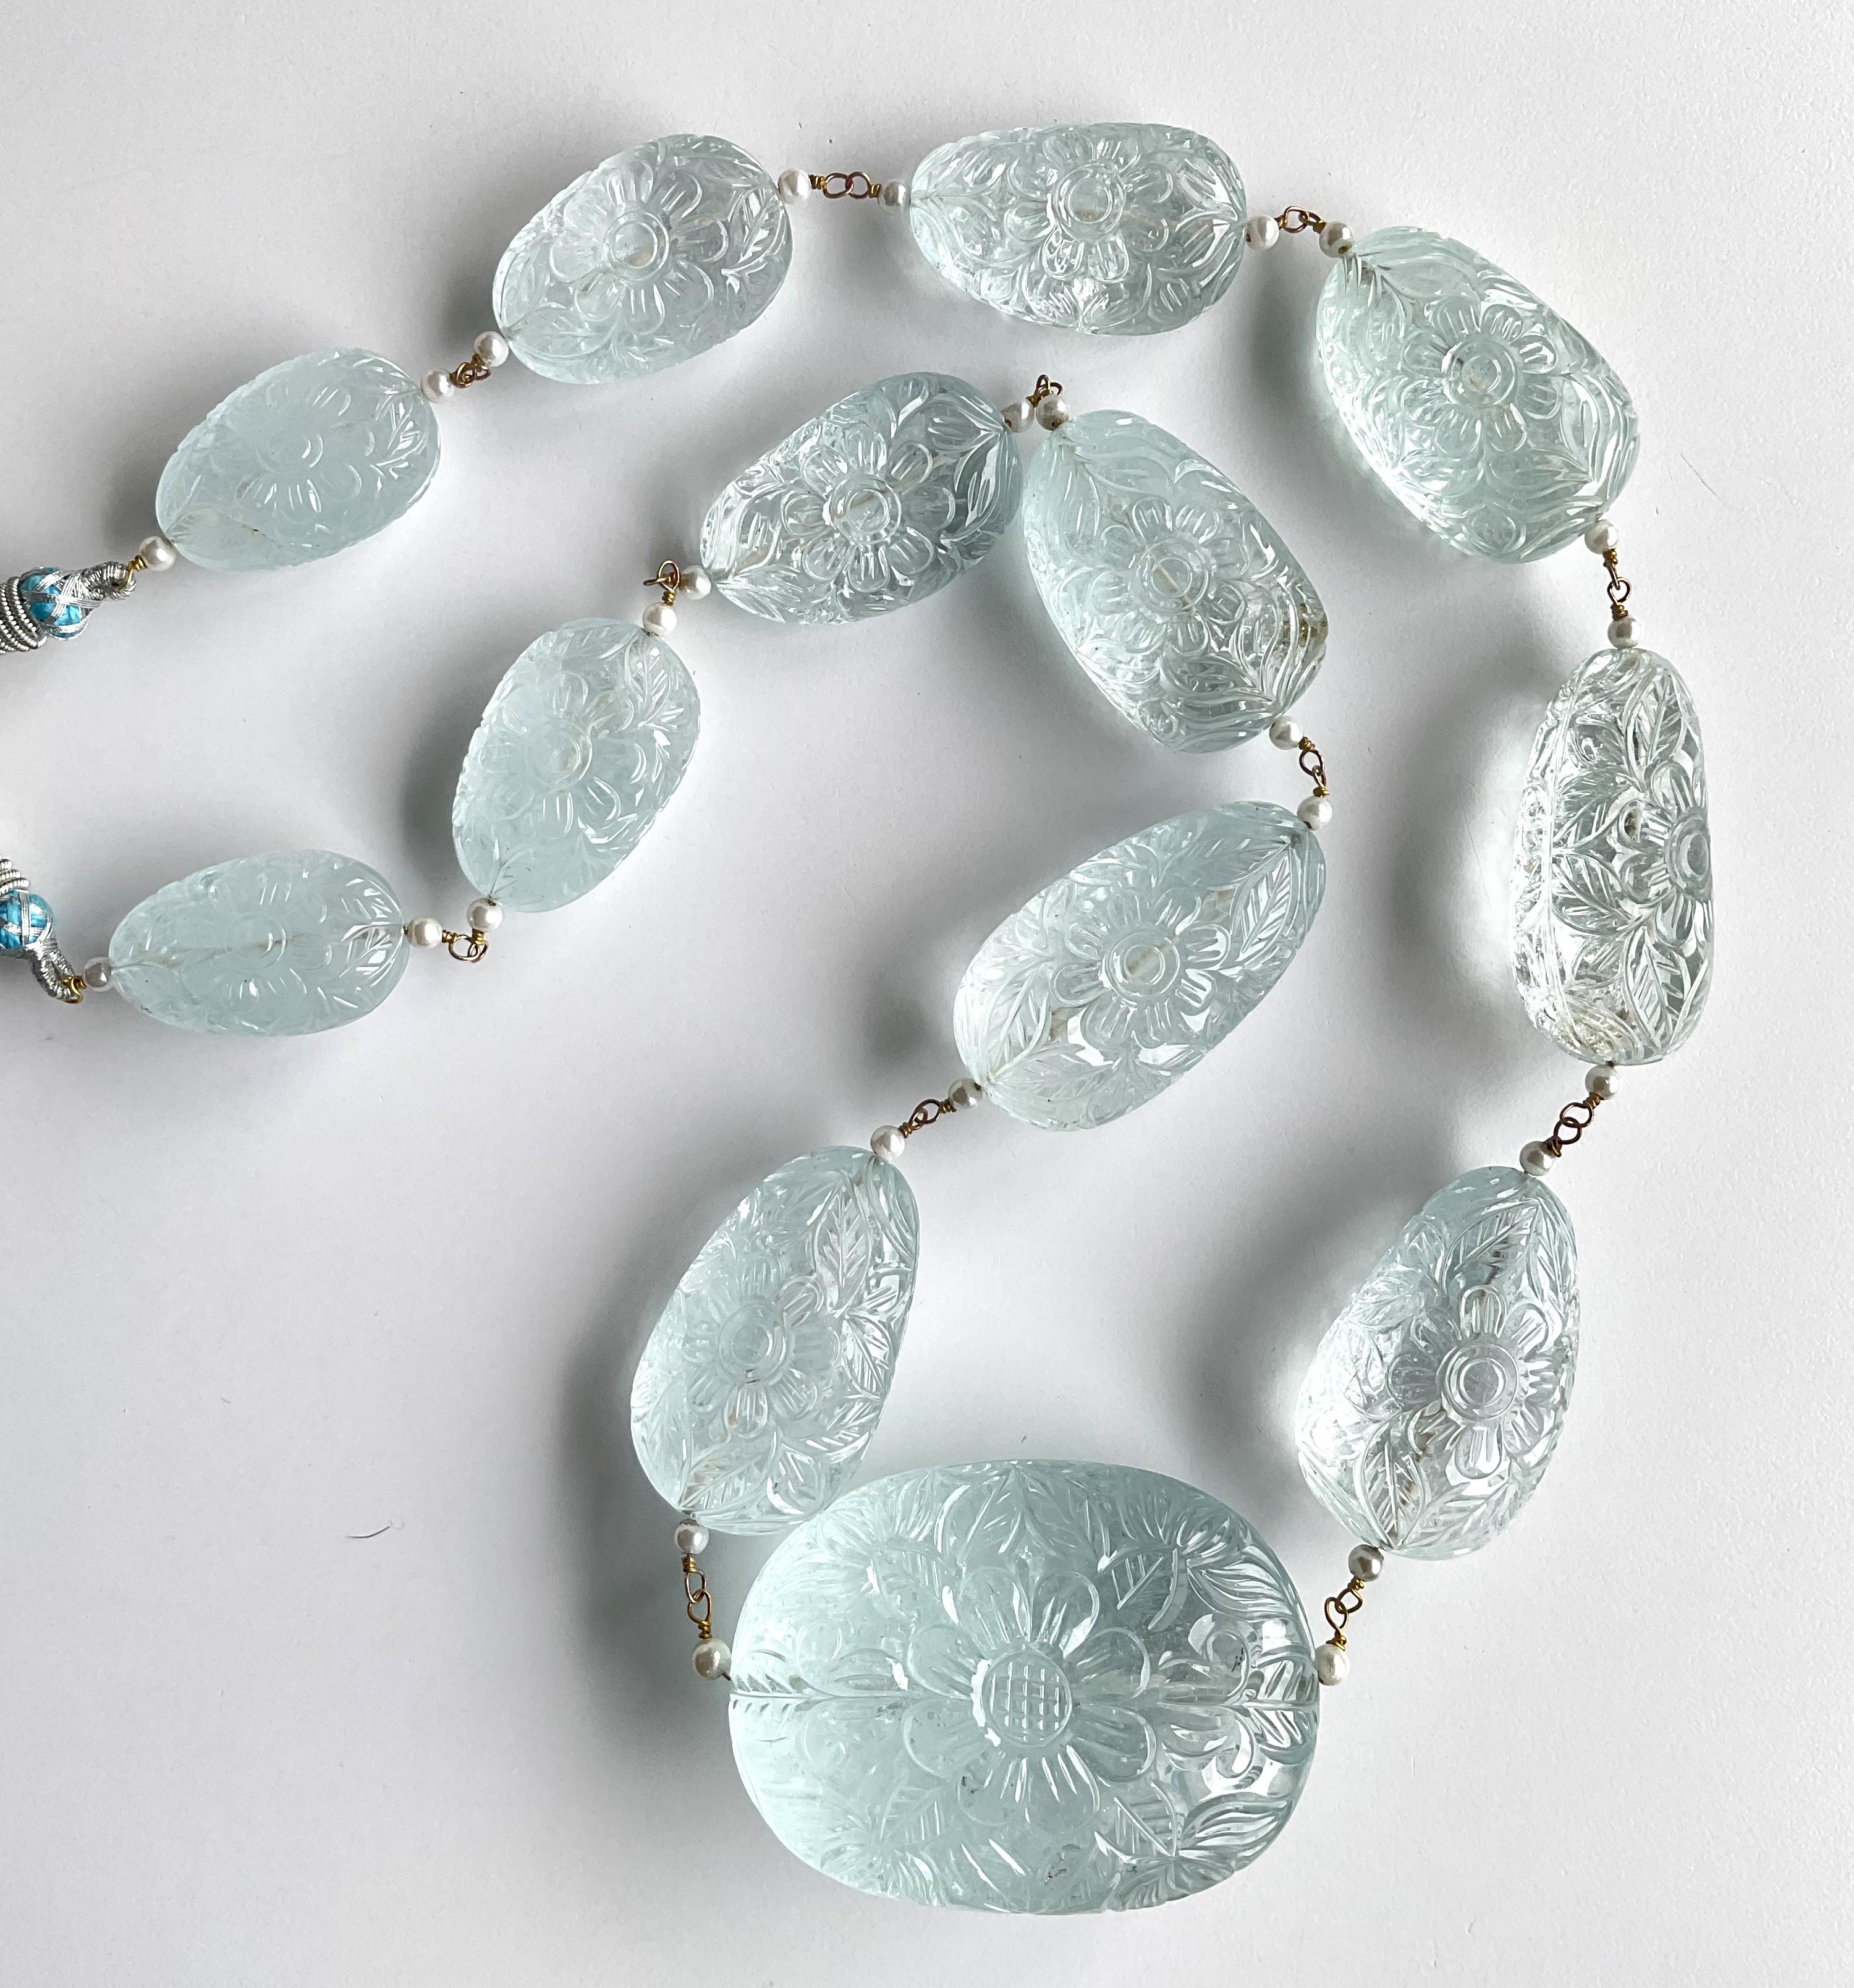 Women's or Men's 1828.70 Carats Aquamarine Carved Tumbled Necklace Top Quality Natural Gemstone For Sale